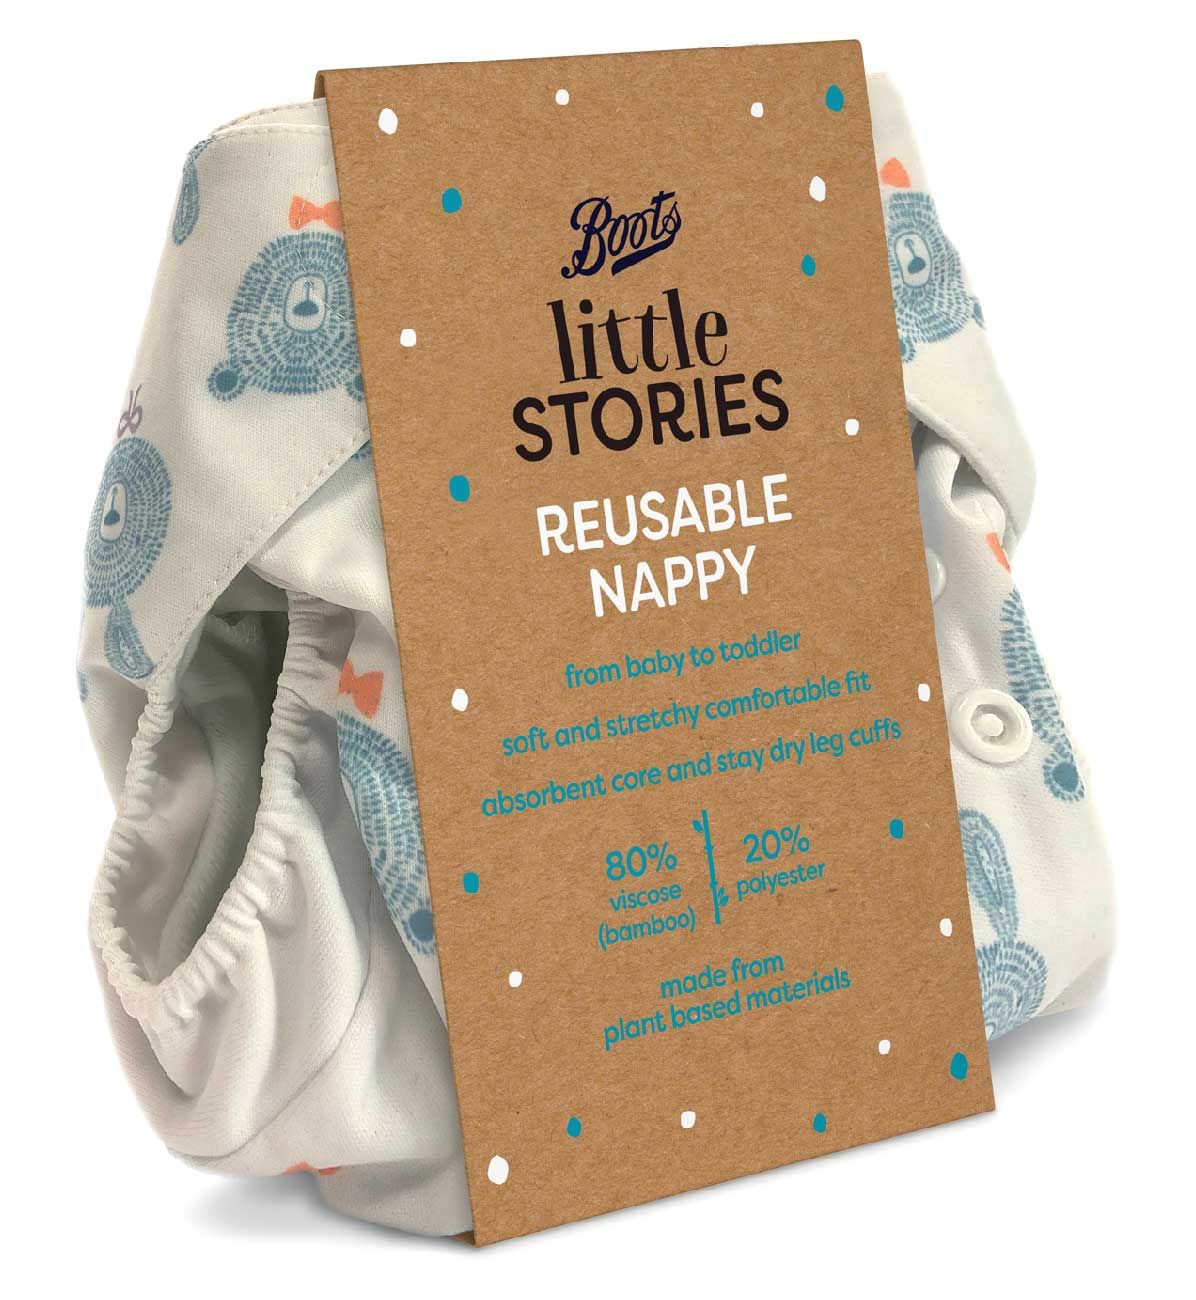 Boots Little Stories Reusable Nappy Animal Print